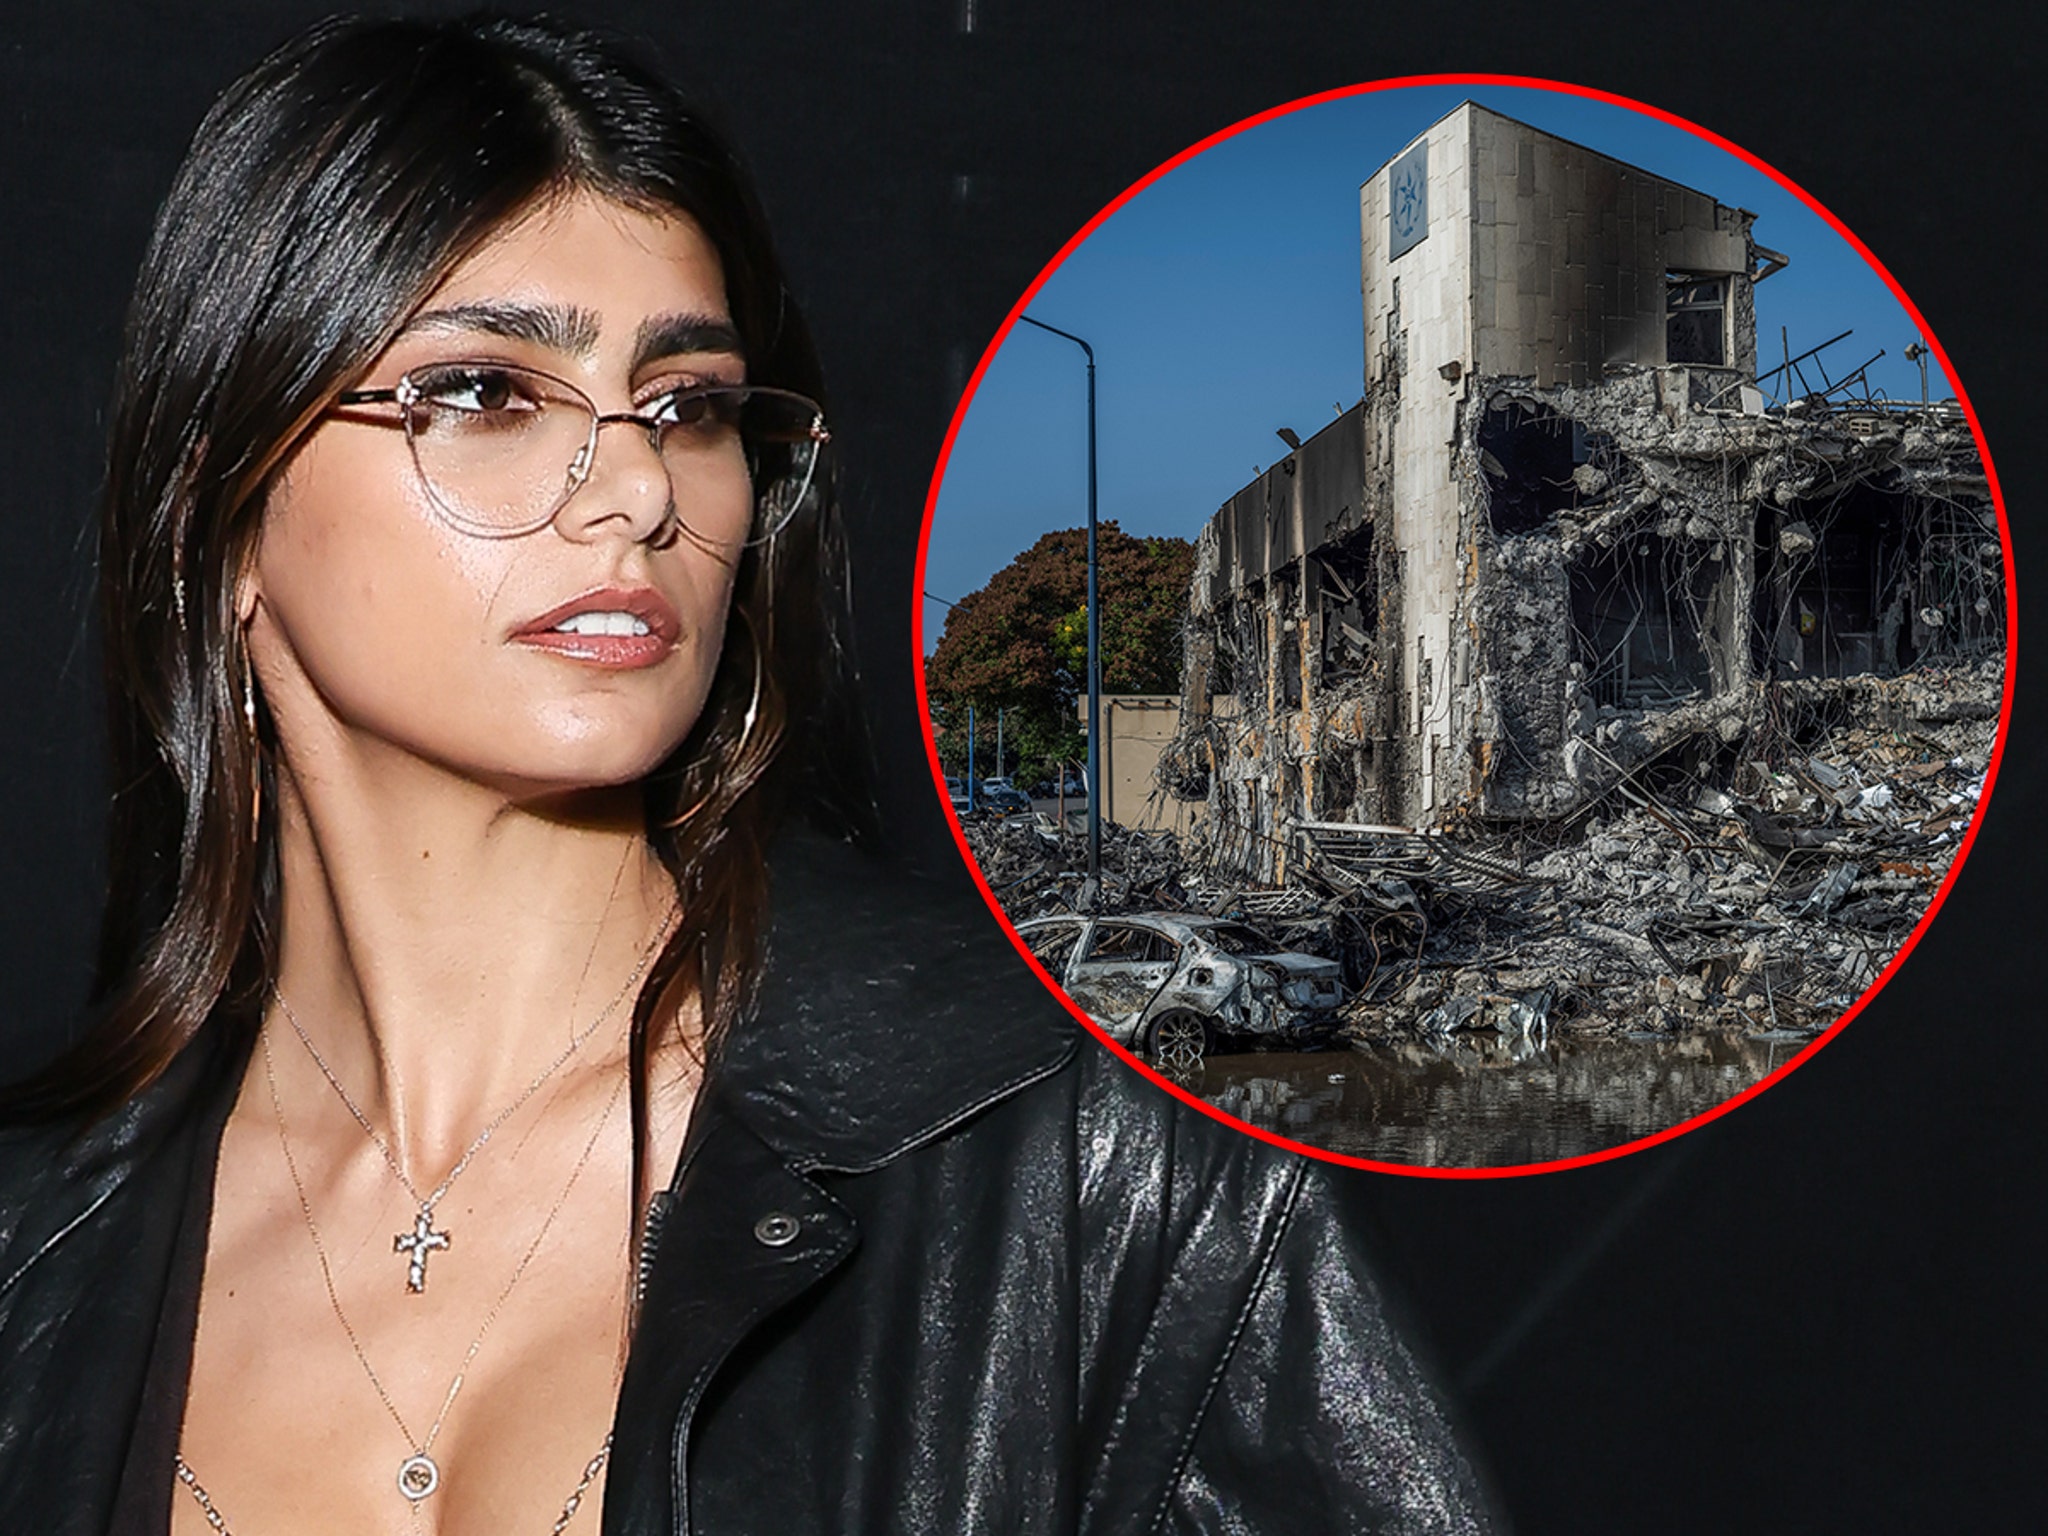 Mia Khalifa X Blue Film Online - Mia Khalifa Fired By Playboy After Sharing Pro-Hamas Thoughts Online